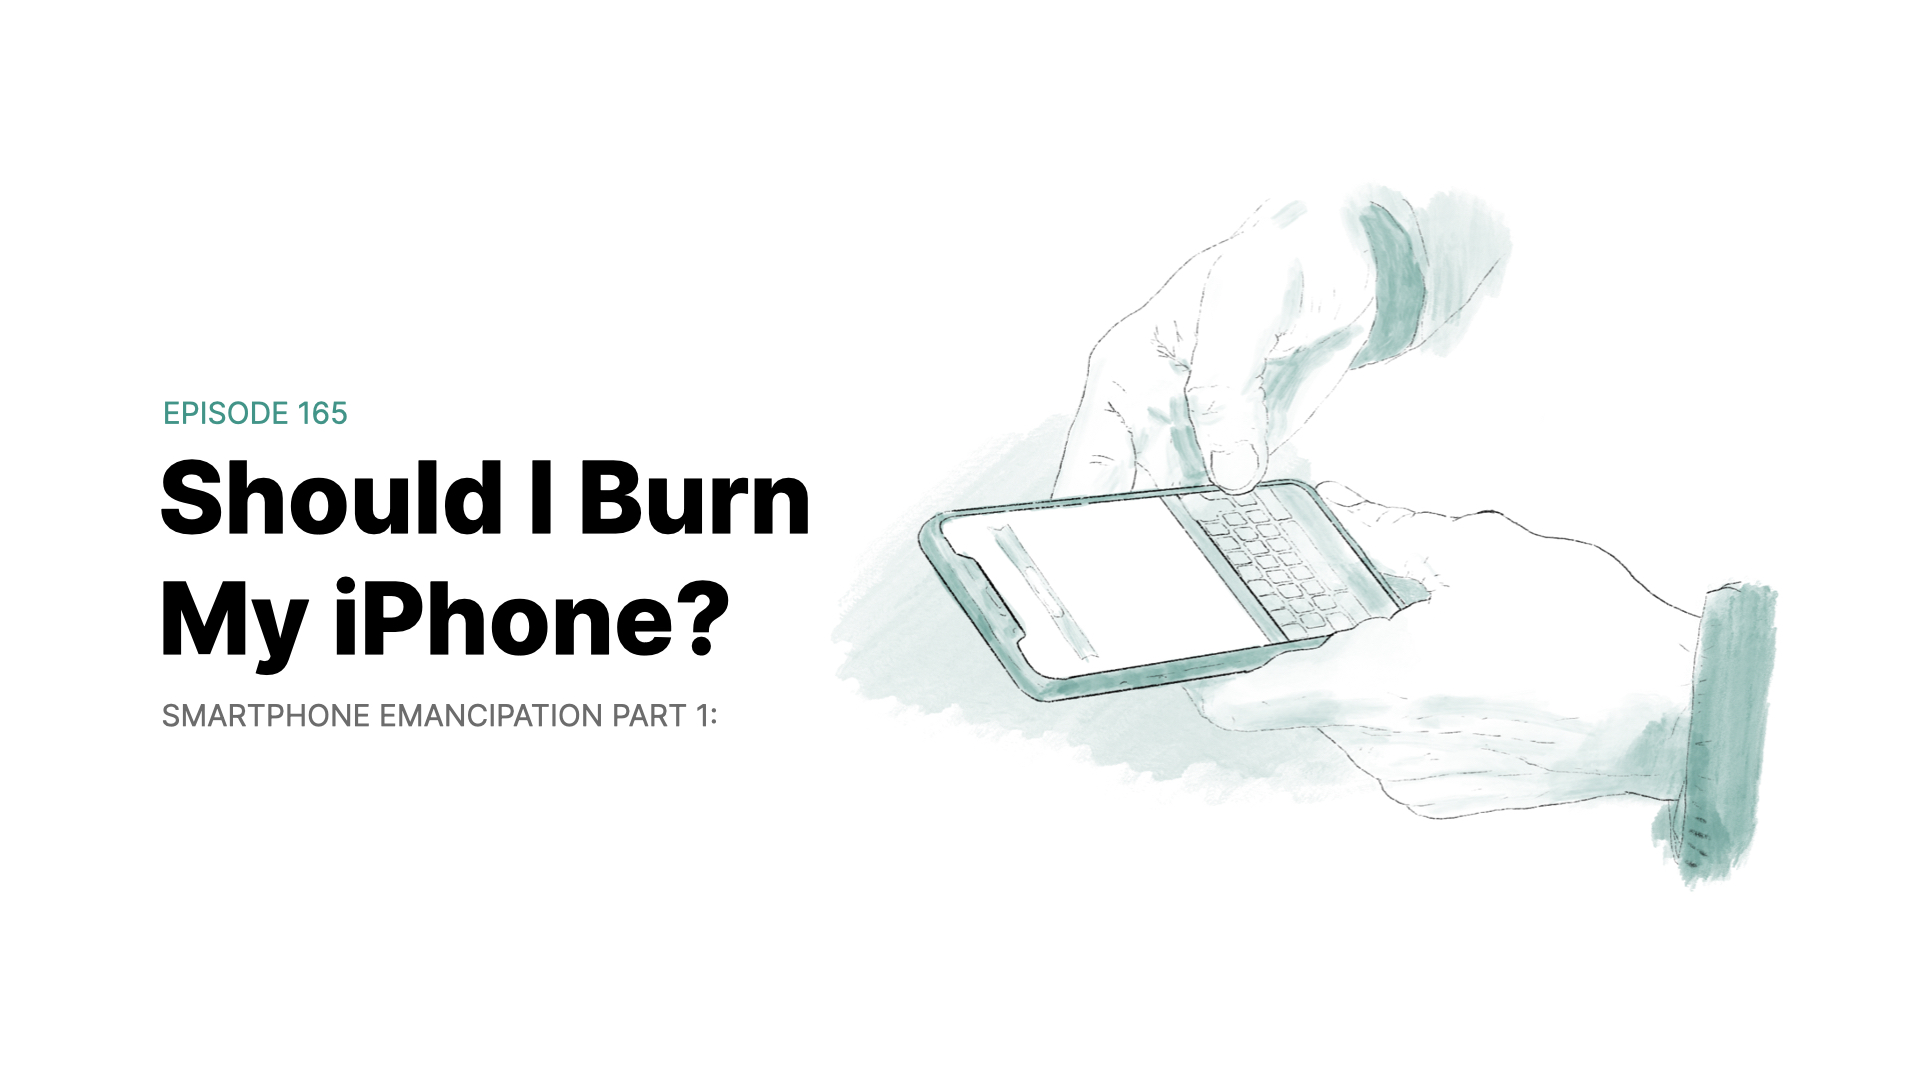 The dumb phone that could cure your smartphone habit: Light Phone